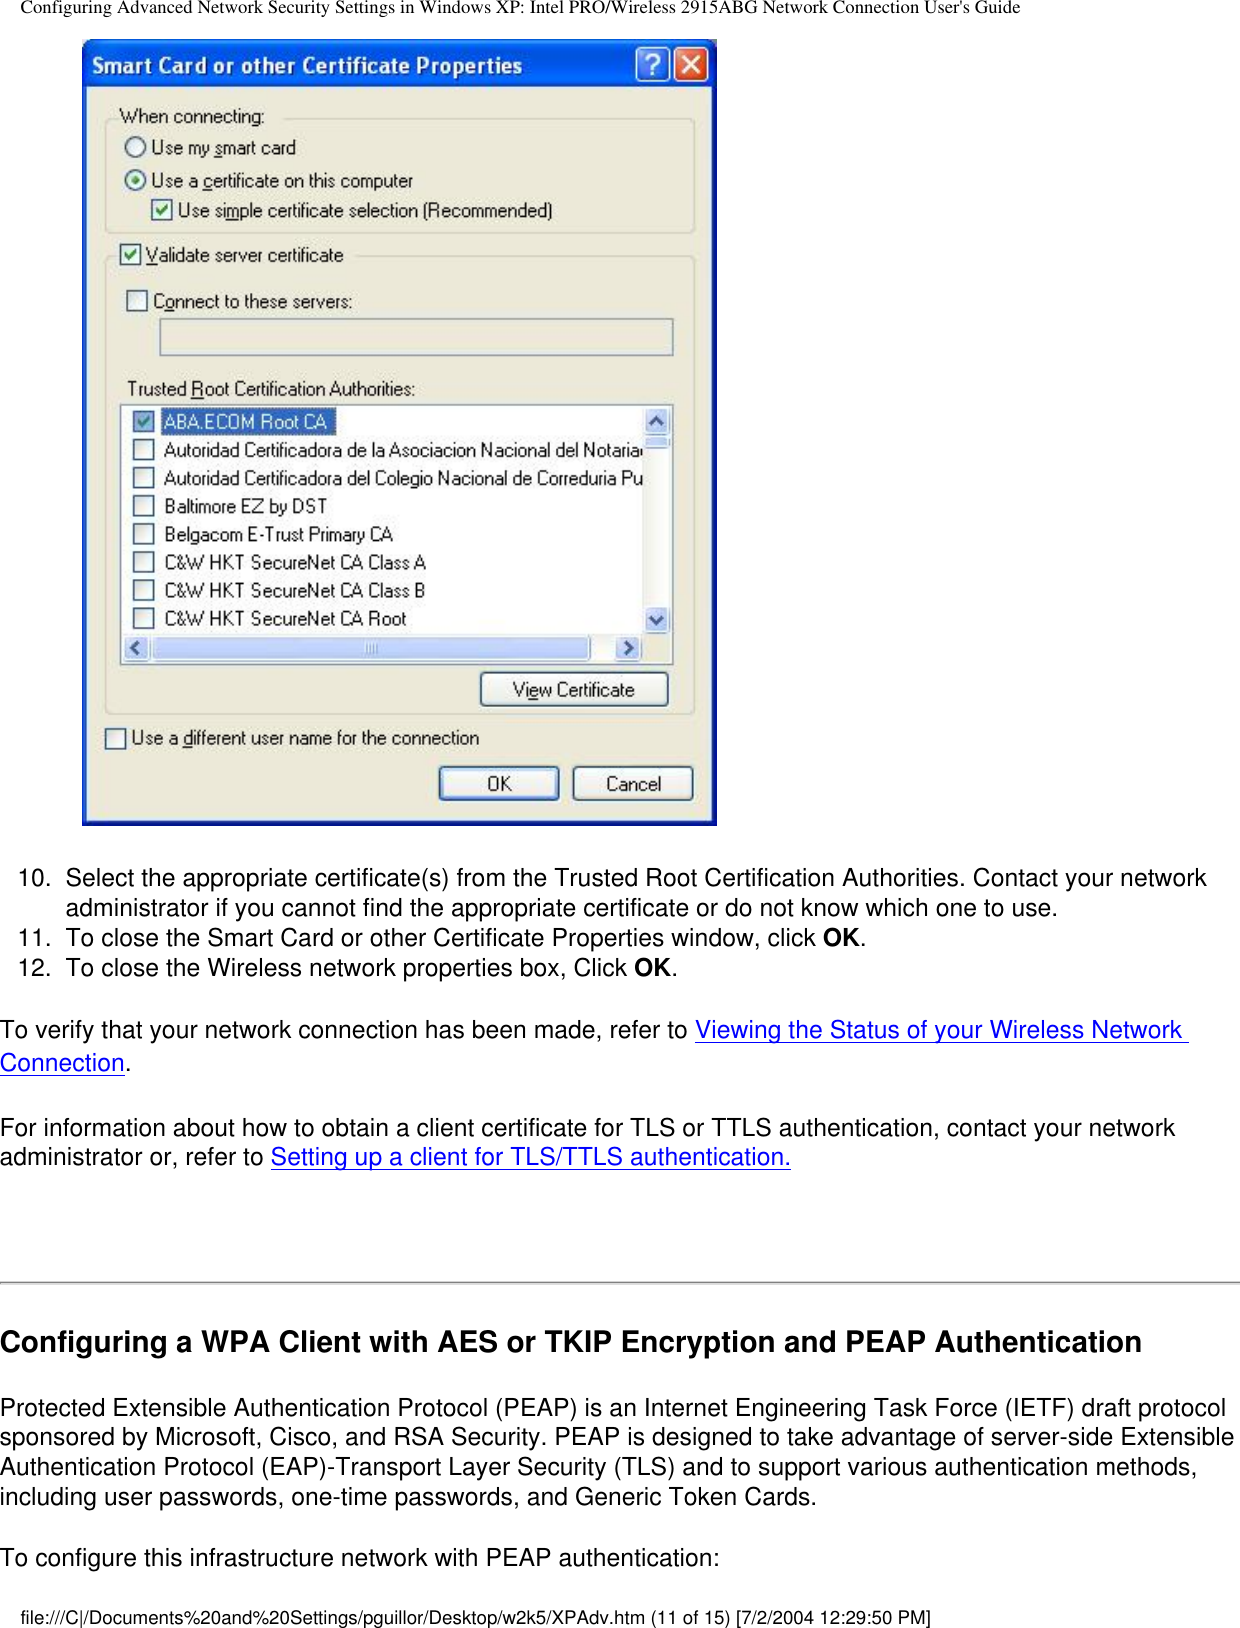 Configuring Advanced Network Security Settings in Windows XP: Intel PRO/Wireless 2915ABG Network Connection User&apos;s Guide              10.  Select the appropriate certificate(s) from the Trusted Root Certification Authorities. Contact your network administrator if you cannot find the appropriate certificate or do not know which one to use.11.  To close the Smart Card or other Certificate Properties window, click OK.12.  To close the Wireless network properties box, Click OK.To verify that your network connection has been made, refer to Viewing the Status of your Wireless Network Connection.For information about how to obtain a client certificate for TLS or TTLS authentication, contact your network administrator or, refer to Setting up a client for TLS/TTLS authentication.  Configuring a WPA Client with AES or TKIP Encryption and PEAP AuthenticationProtected Extensible Authentication Protocol (PEAP) is an Internet Engineering Task Force (IETF) draft protocol sponsored by Microsoft, Cisco, and RSA Security. PEAP is designed to take advantage of server-side Extensible Authentication Protocol (EAP)-Transport Layer Security (TLS) and to support various authentication methods, including user passwords, one-time passwords, and Generic Token Cards.To configure this infrastructure network with PEAP authentication:file:///C|/Documents%20and%20Settings/pguillor/Desktop/w2k5/XPAdv.htm (11 of 15) [7/2/2004 12:29:50 PM]